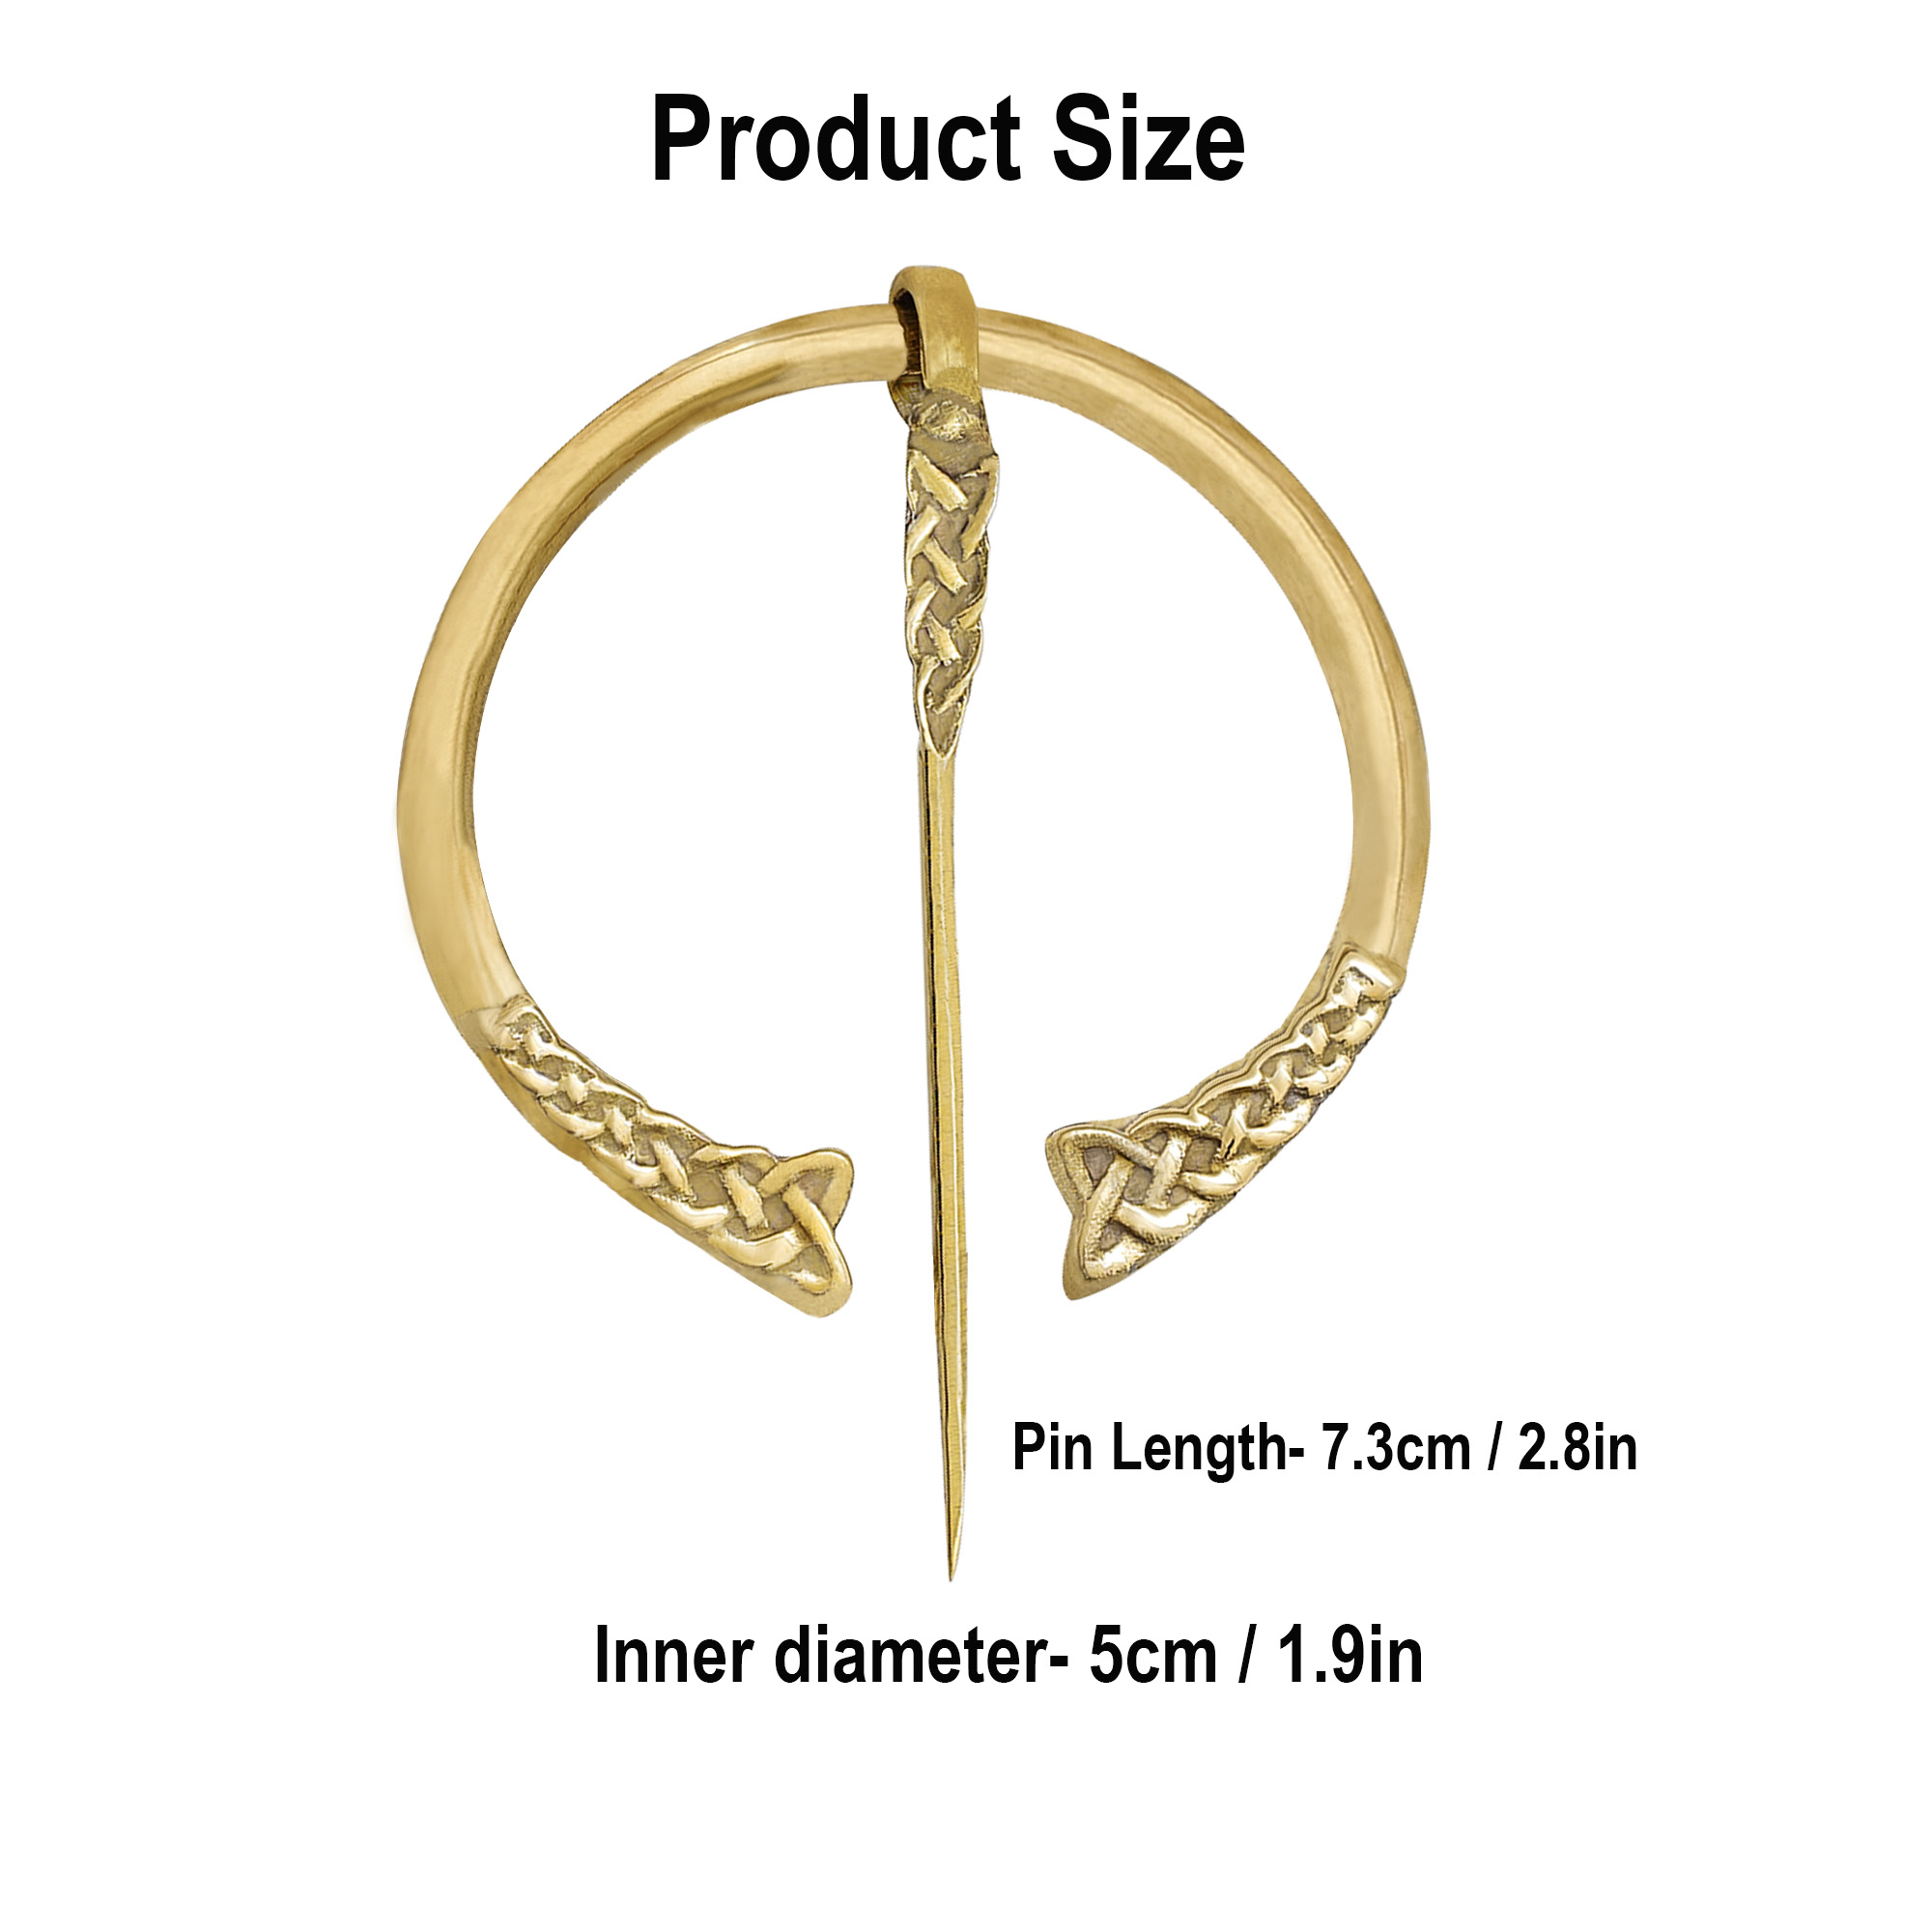  Szco Supplies Medieval Cloak Pin : Clothing, Shoes & Jewelry